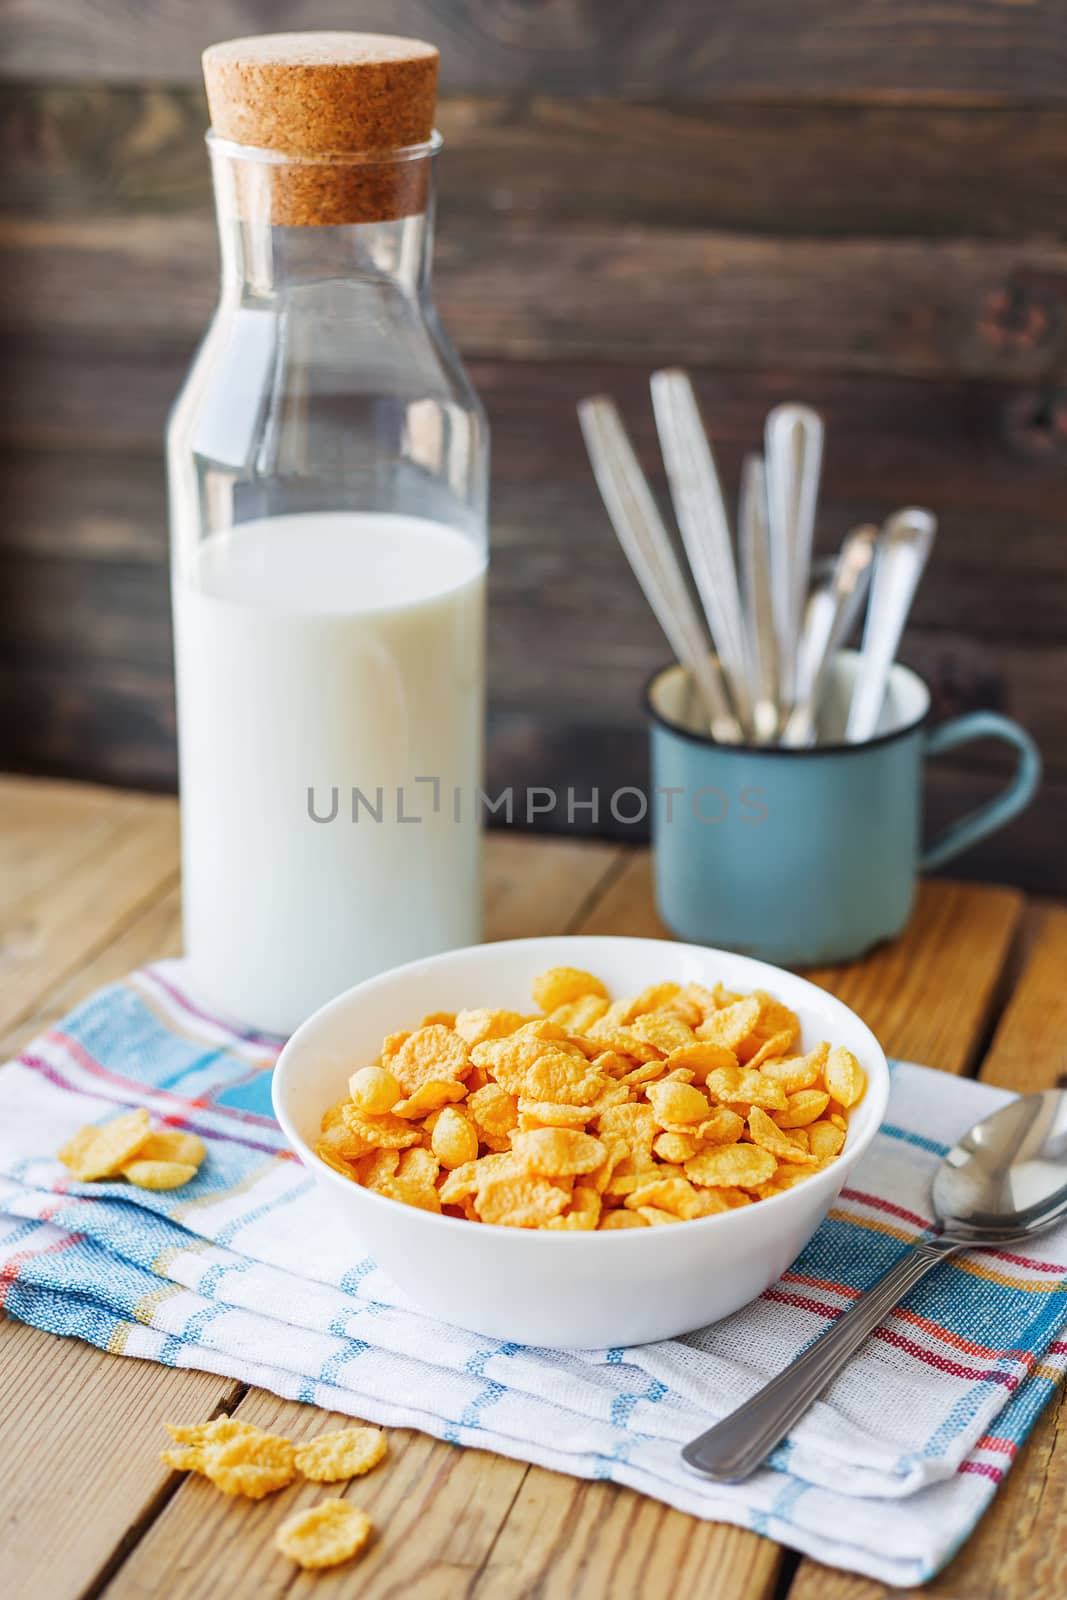 Tasty corn flakes in white bowl with bottle of milk. Rustic wooden background with plaid napkin. Healthy crispy breakfast snack.